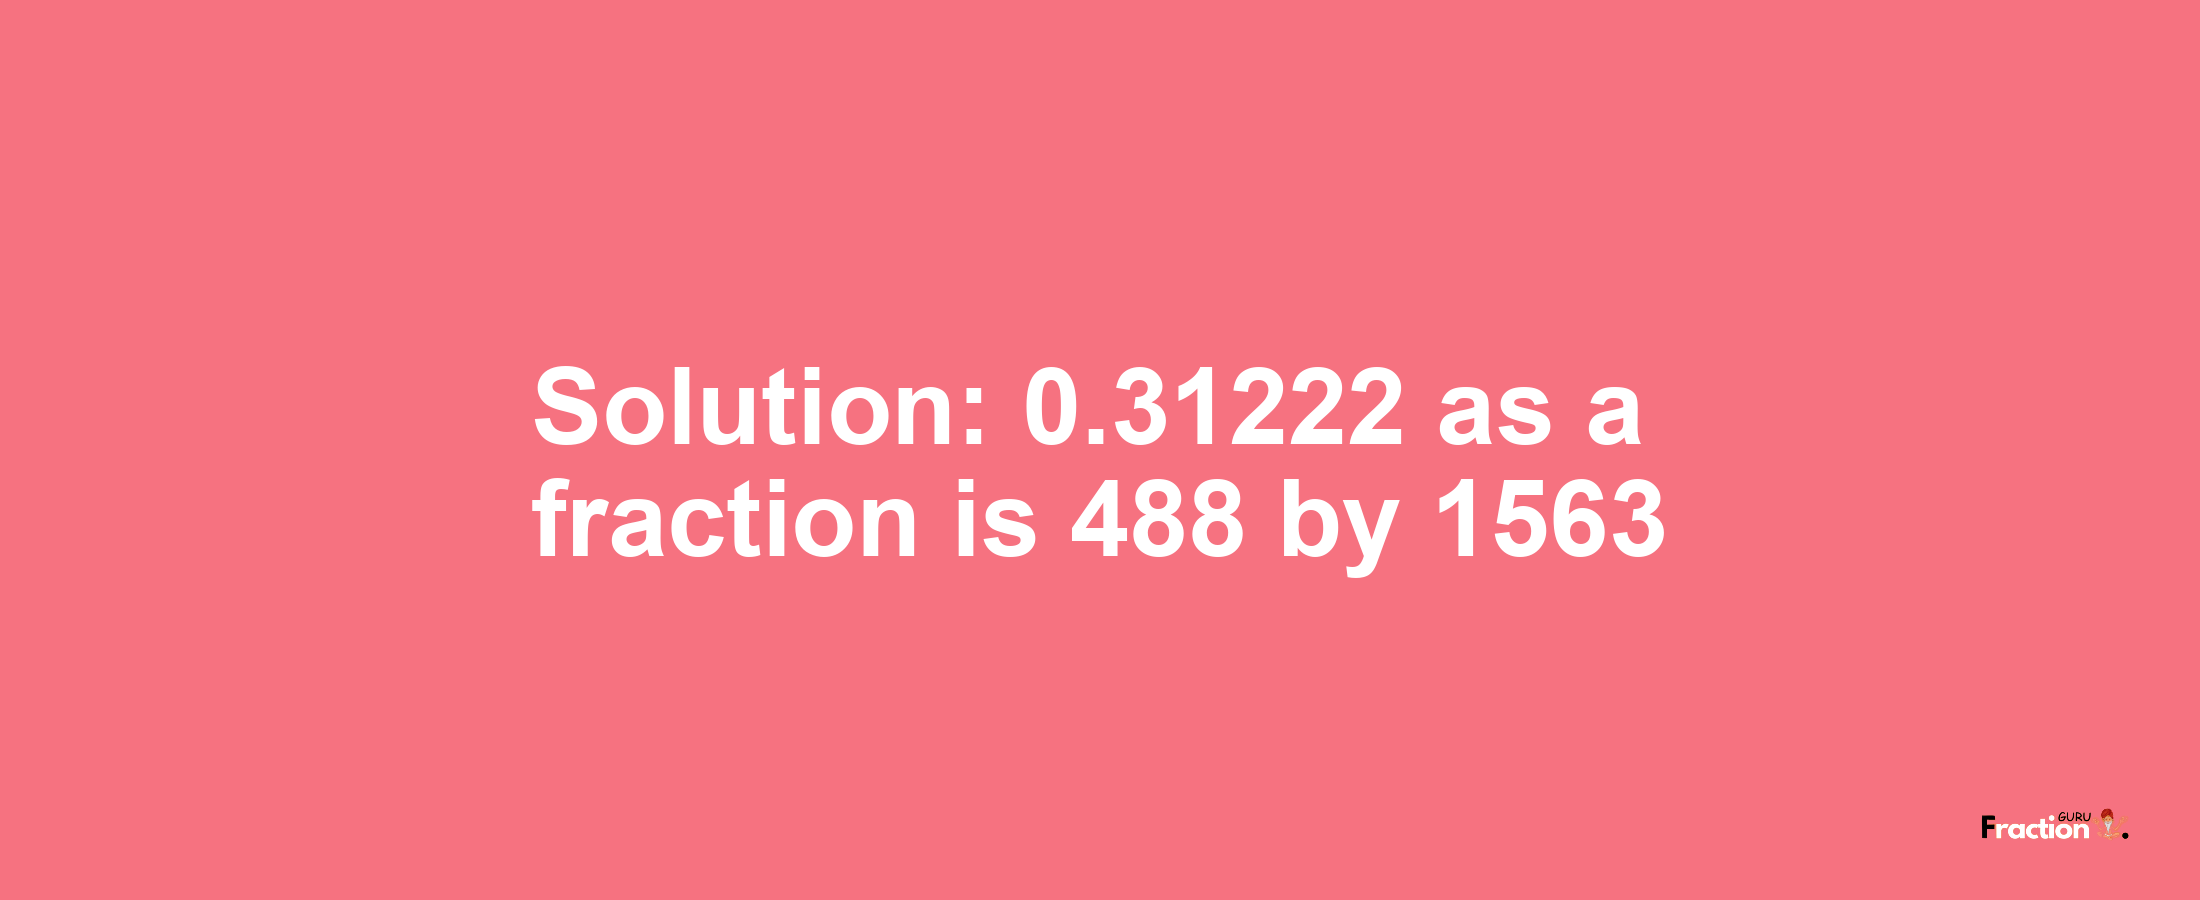 Solution:0.31222 as a fraction is 488/1563